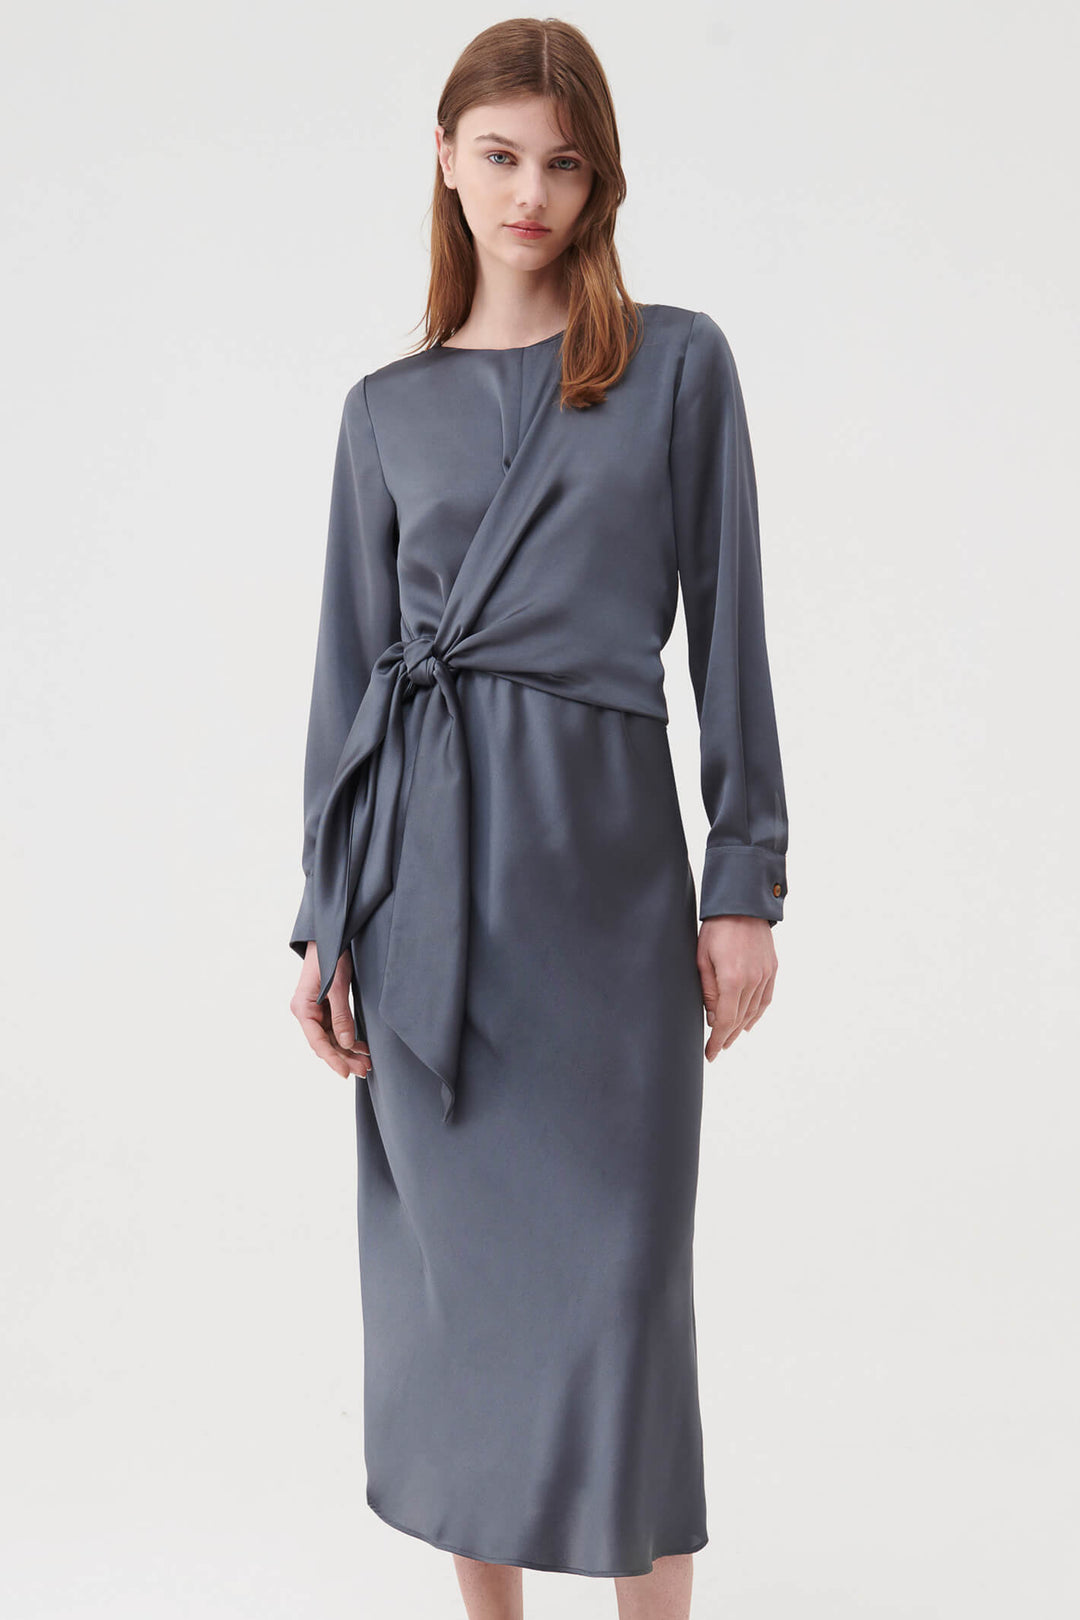 Marella Sion 2332260836200 Pewter Grey Satin Dress With Sleeves - Olivia Grace Fashion